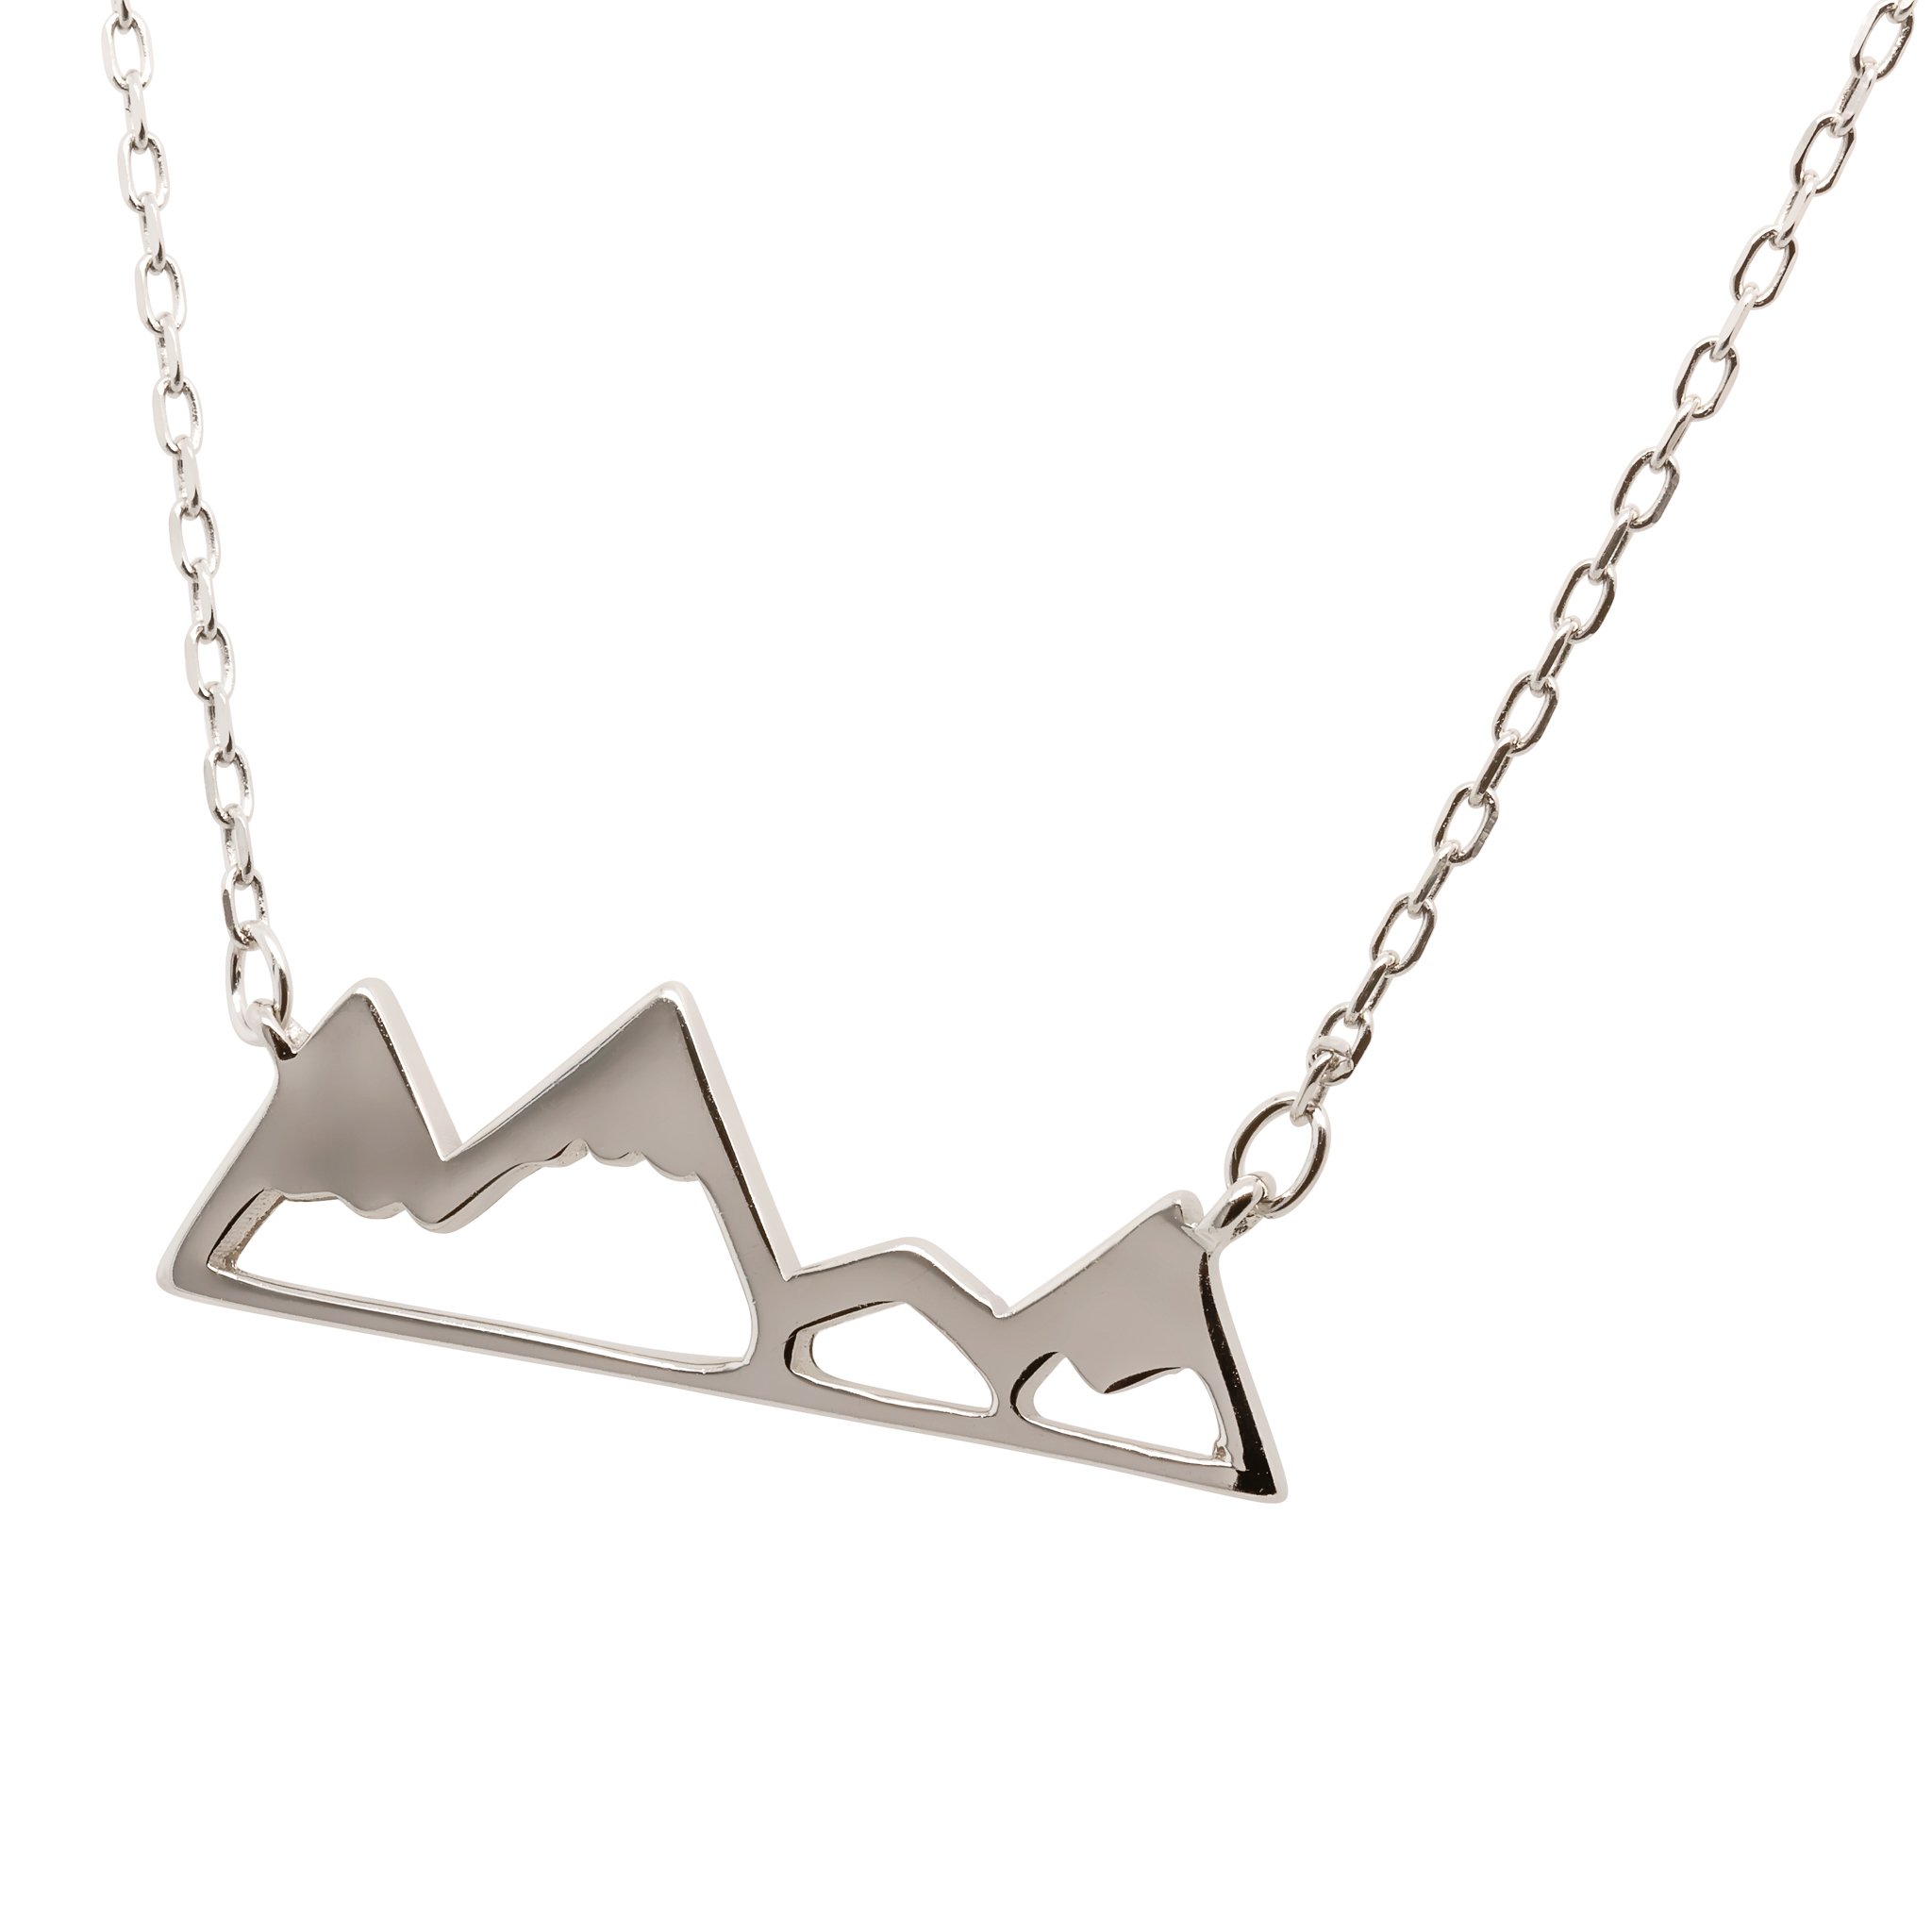 Mountain Necklace 925 Sterling Silver with Sun Mountain Range Camper Gifts  Jewelry for Women : Amazon.co.uk: Fashion